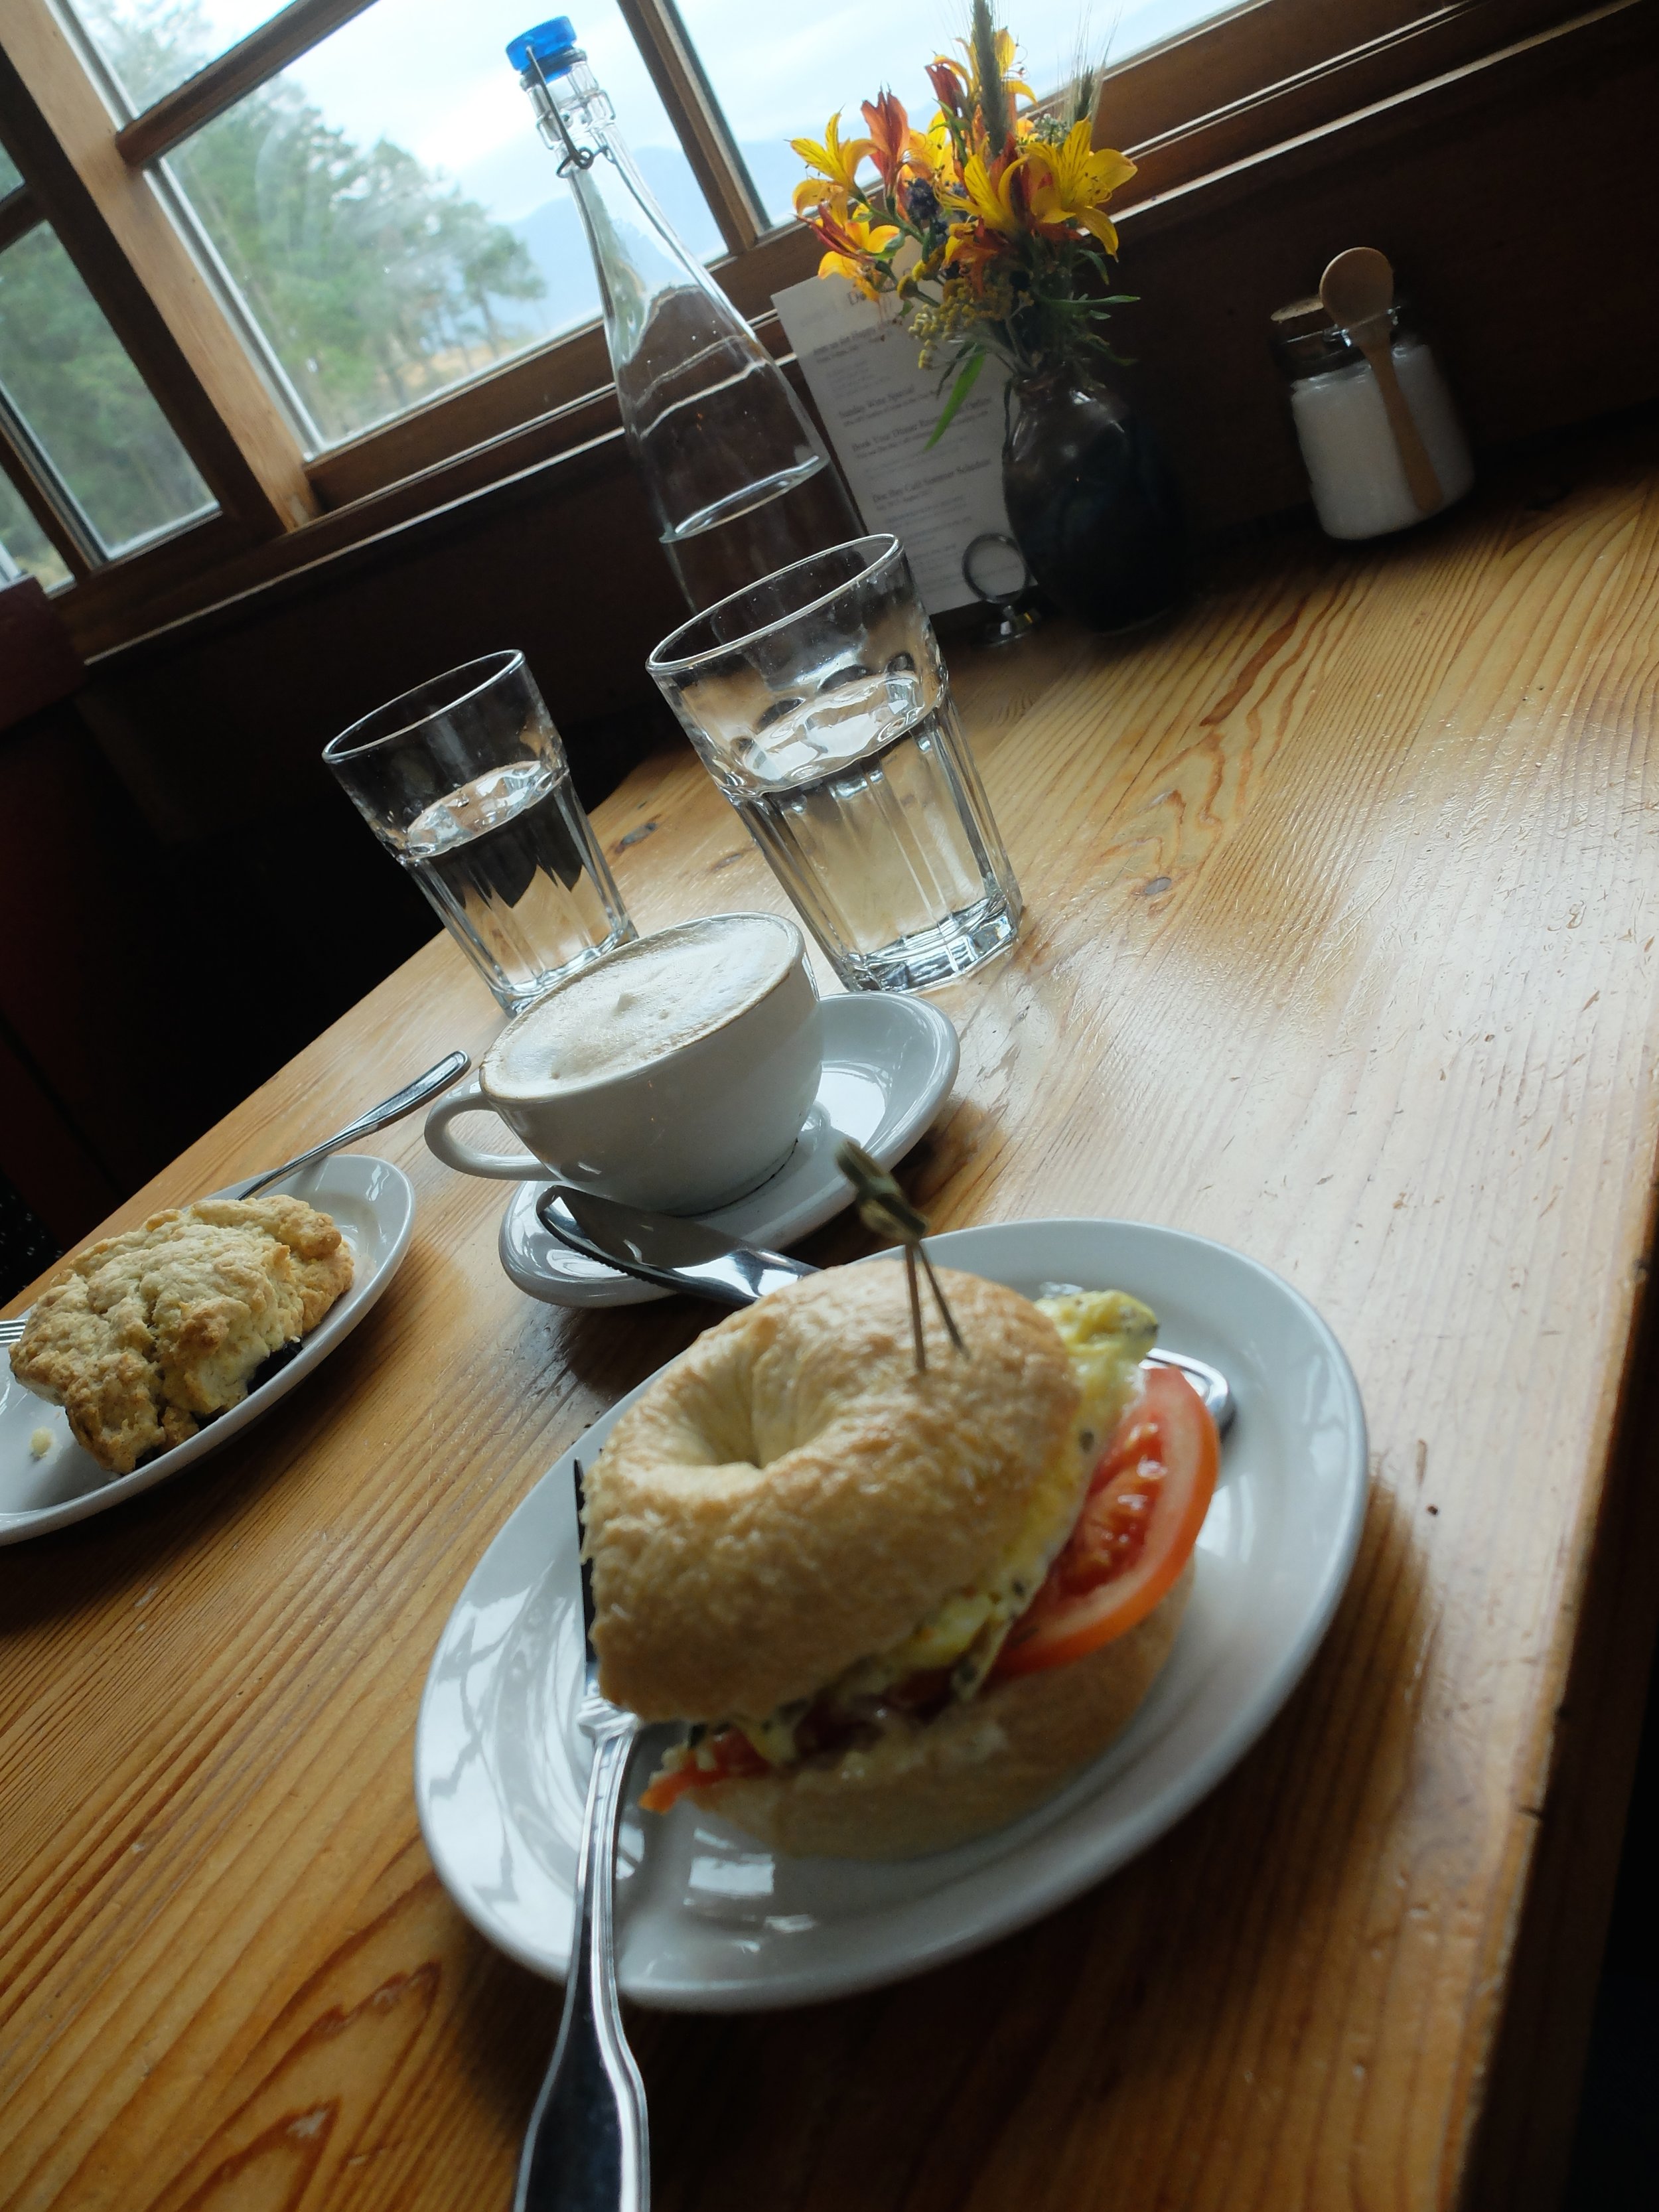  Doe Bay Cafe Orcas Island.&nbsp; Scrambled egg on their version of a bagel.&nbsp; Excellent. 